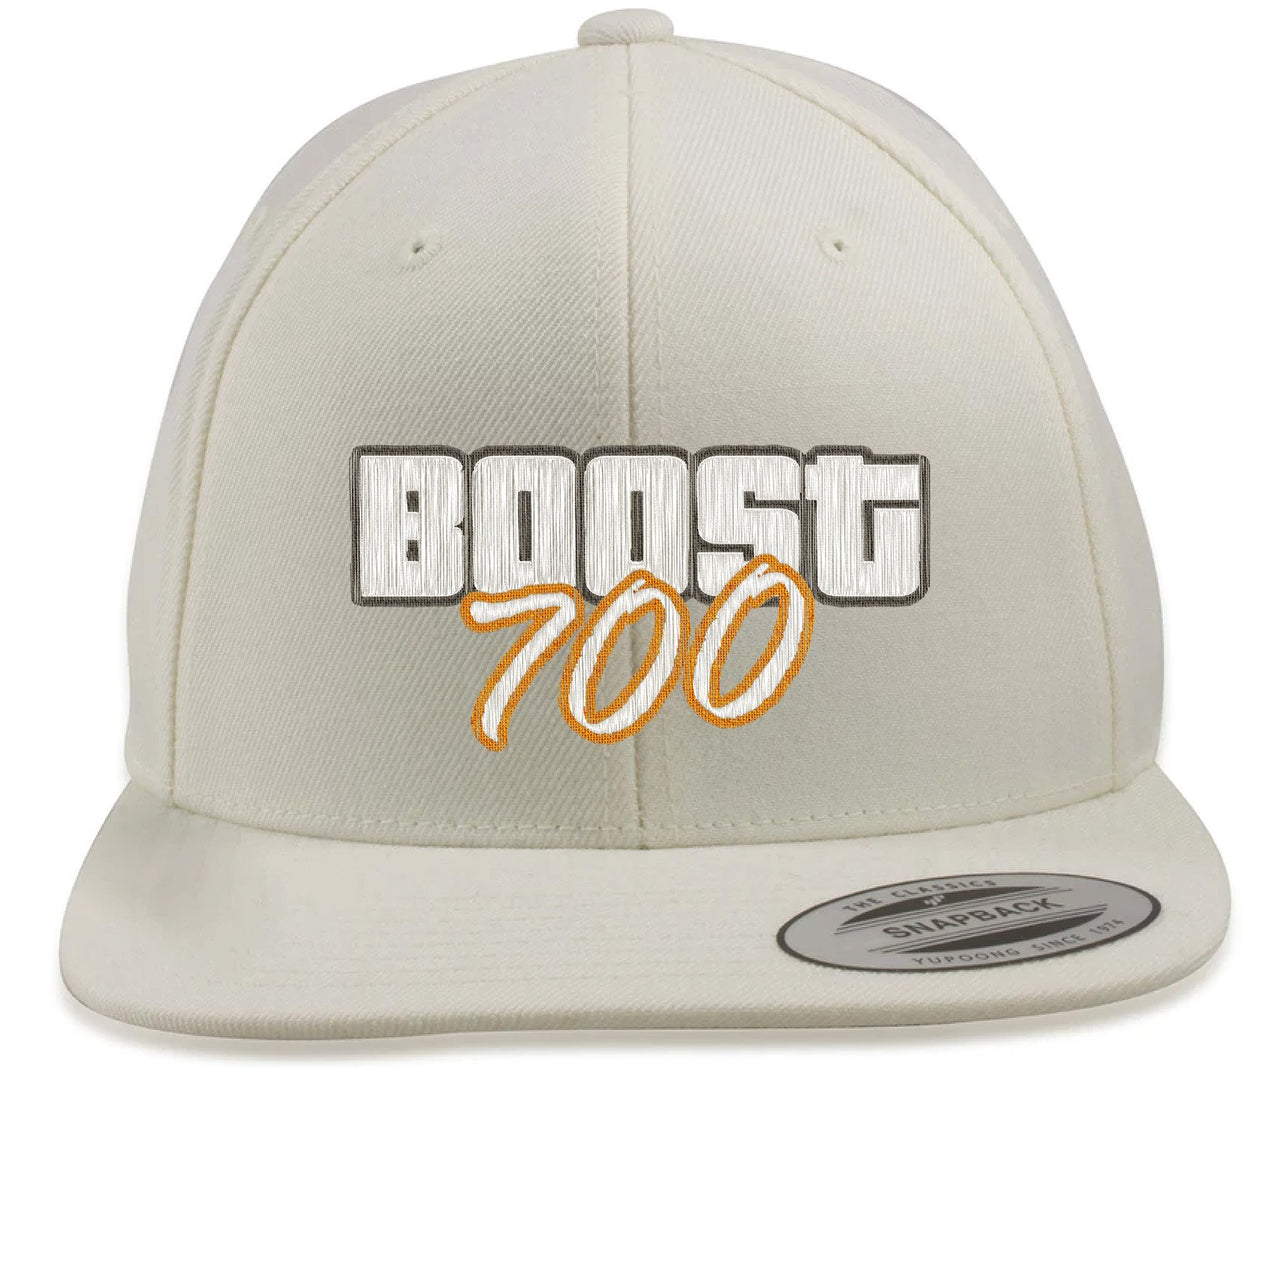 Magnet 700s Snapback Hat | Video Game Cover, Lettering, White